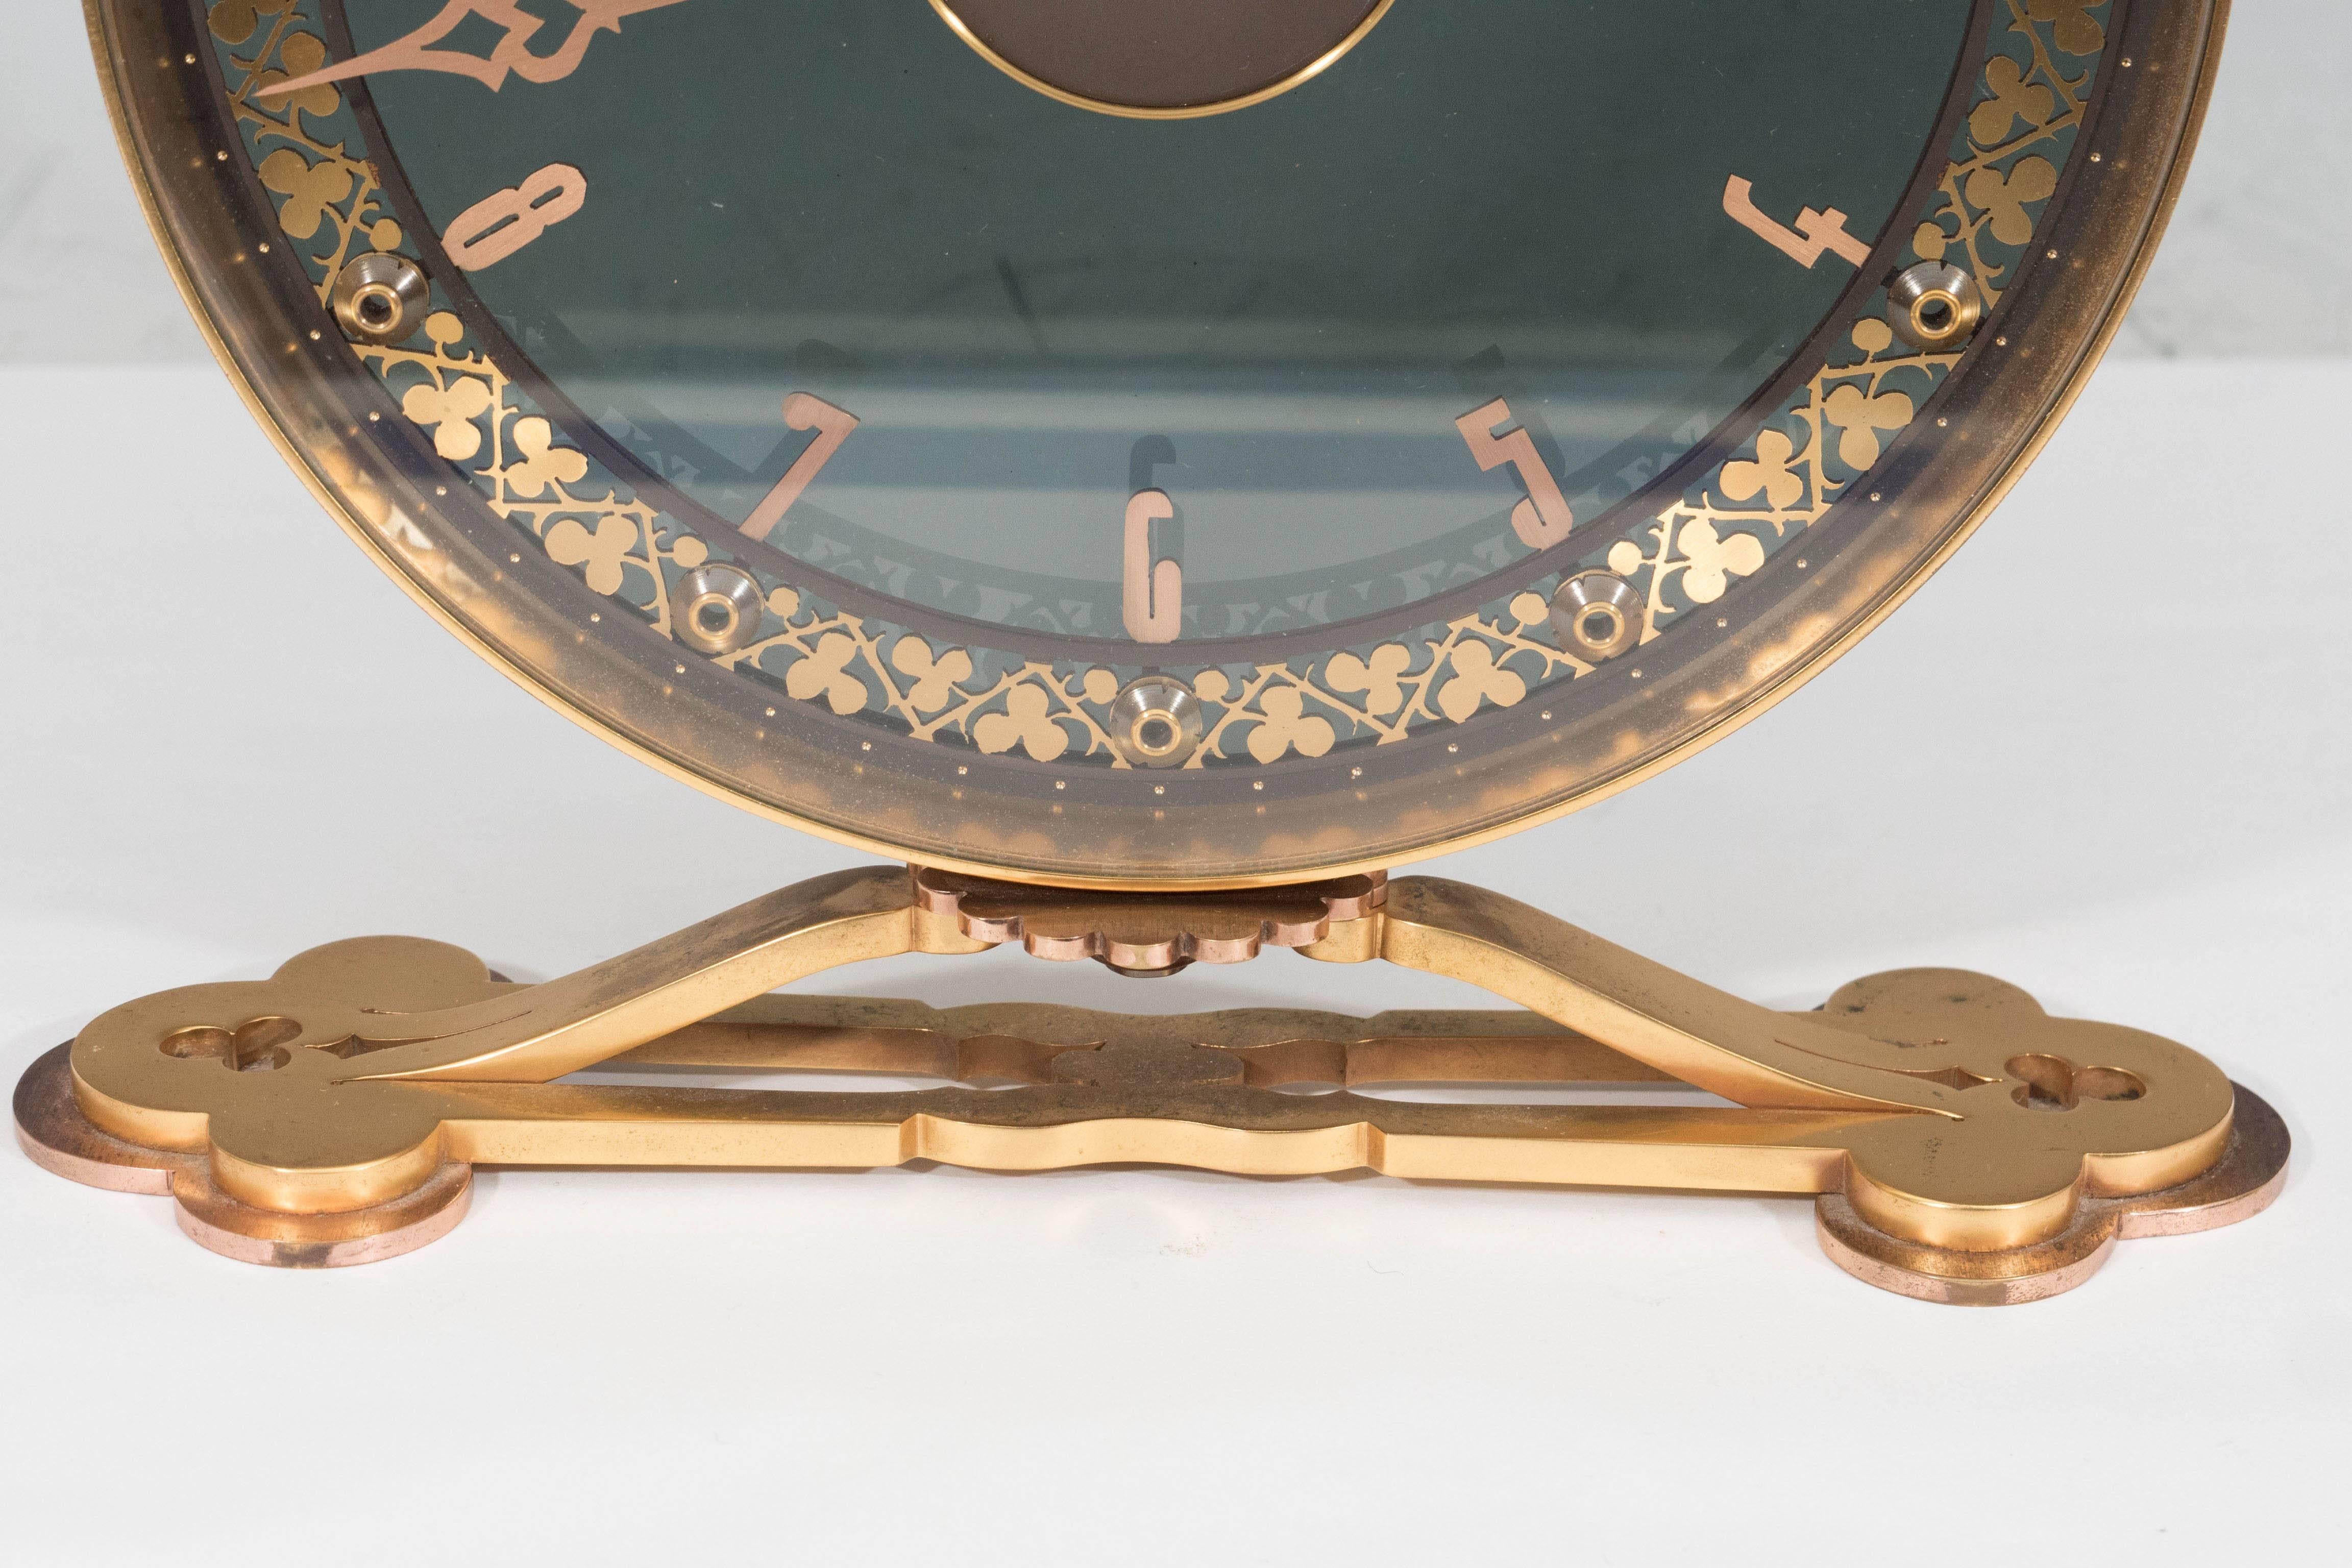 This gorgeous eight-day skeleton desk clock, produced in Geneva Switzerland, circa 1950s by Jaeger-LeCoultre, comes with a round face in smoked glass with Arabic numerals, the border detailed with a pattern of clover-leaf, inset within a brass